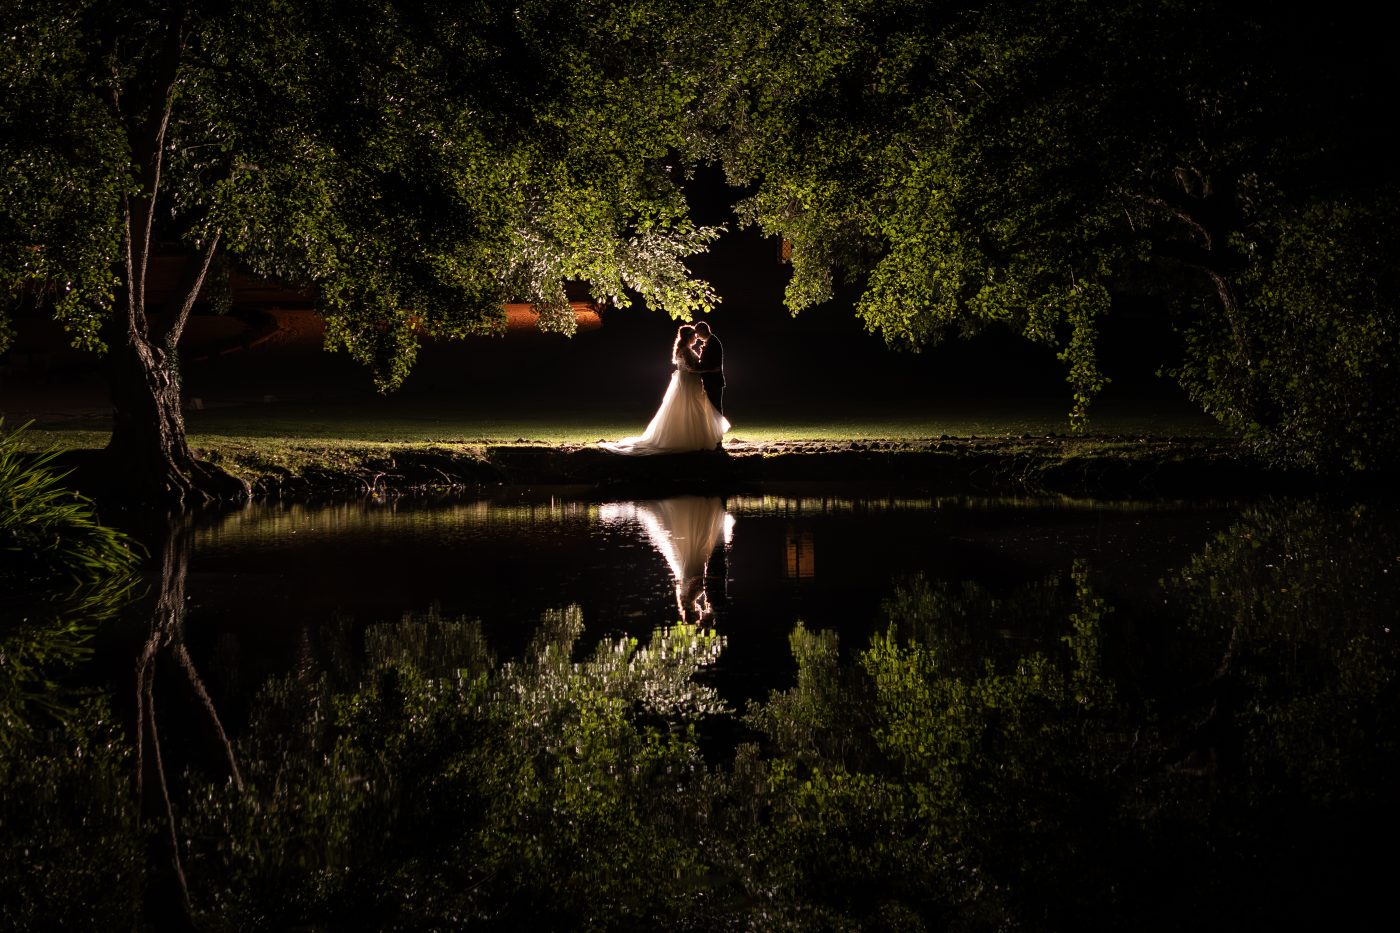 Beautiful night portrait of bride and grooms reflected in lake at night